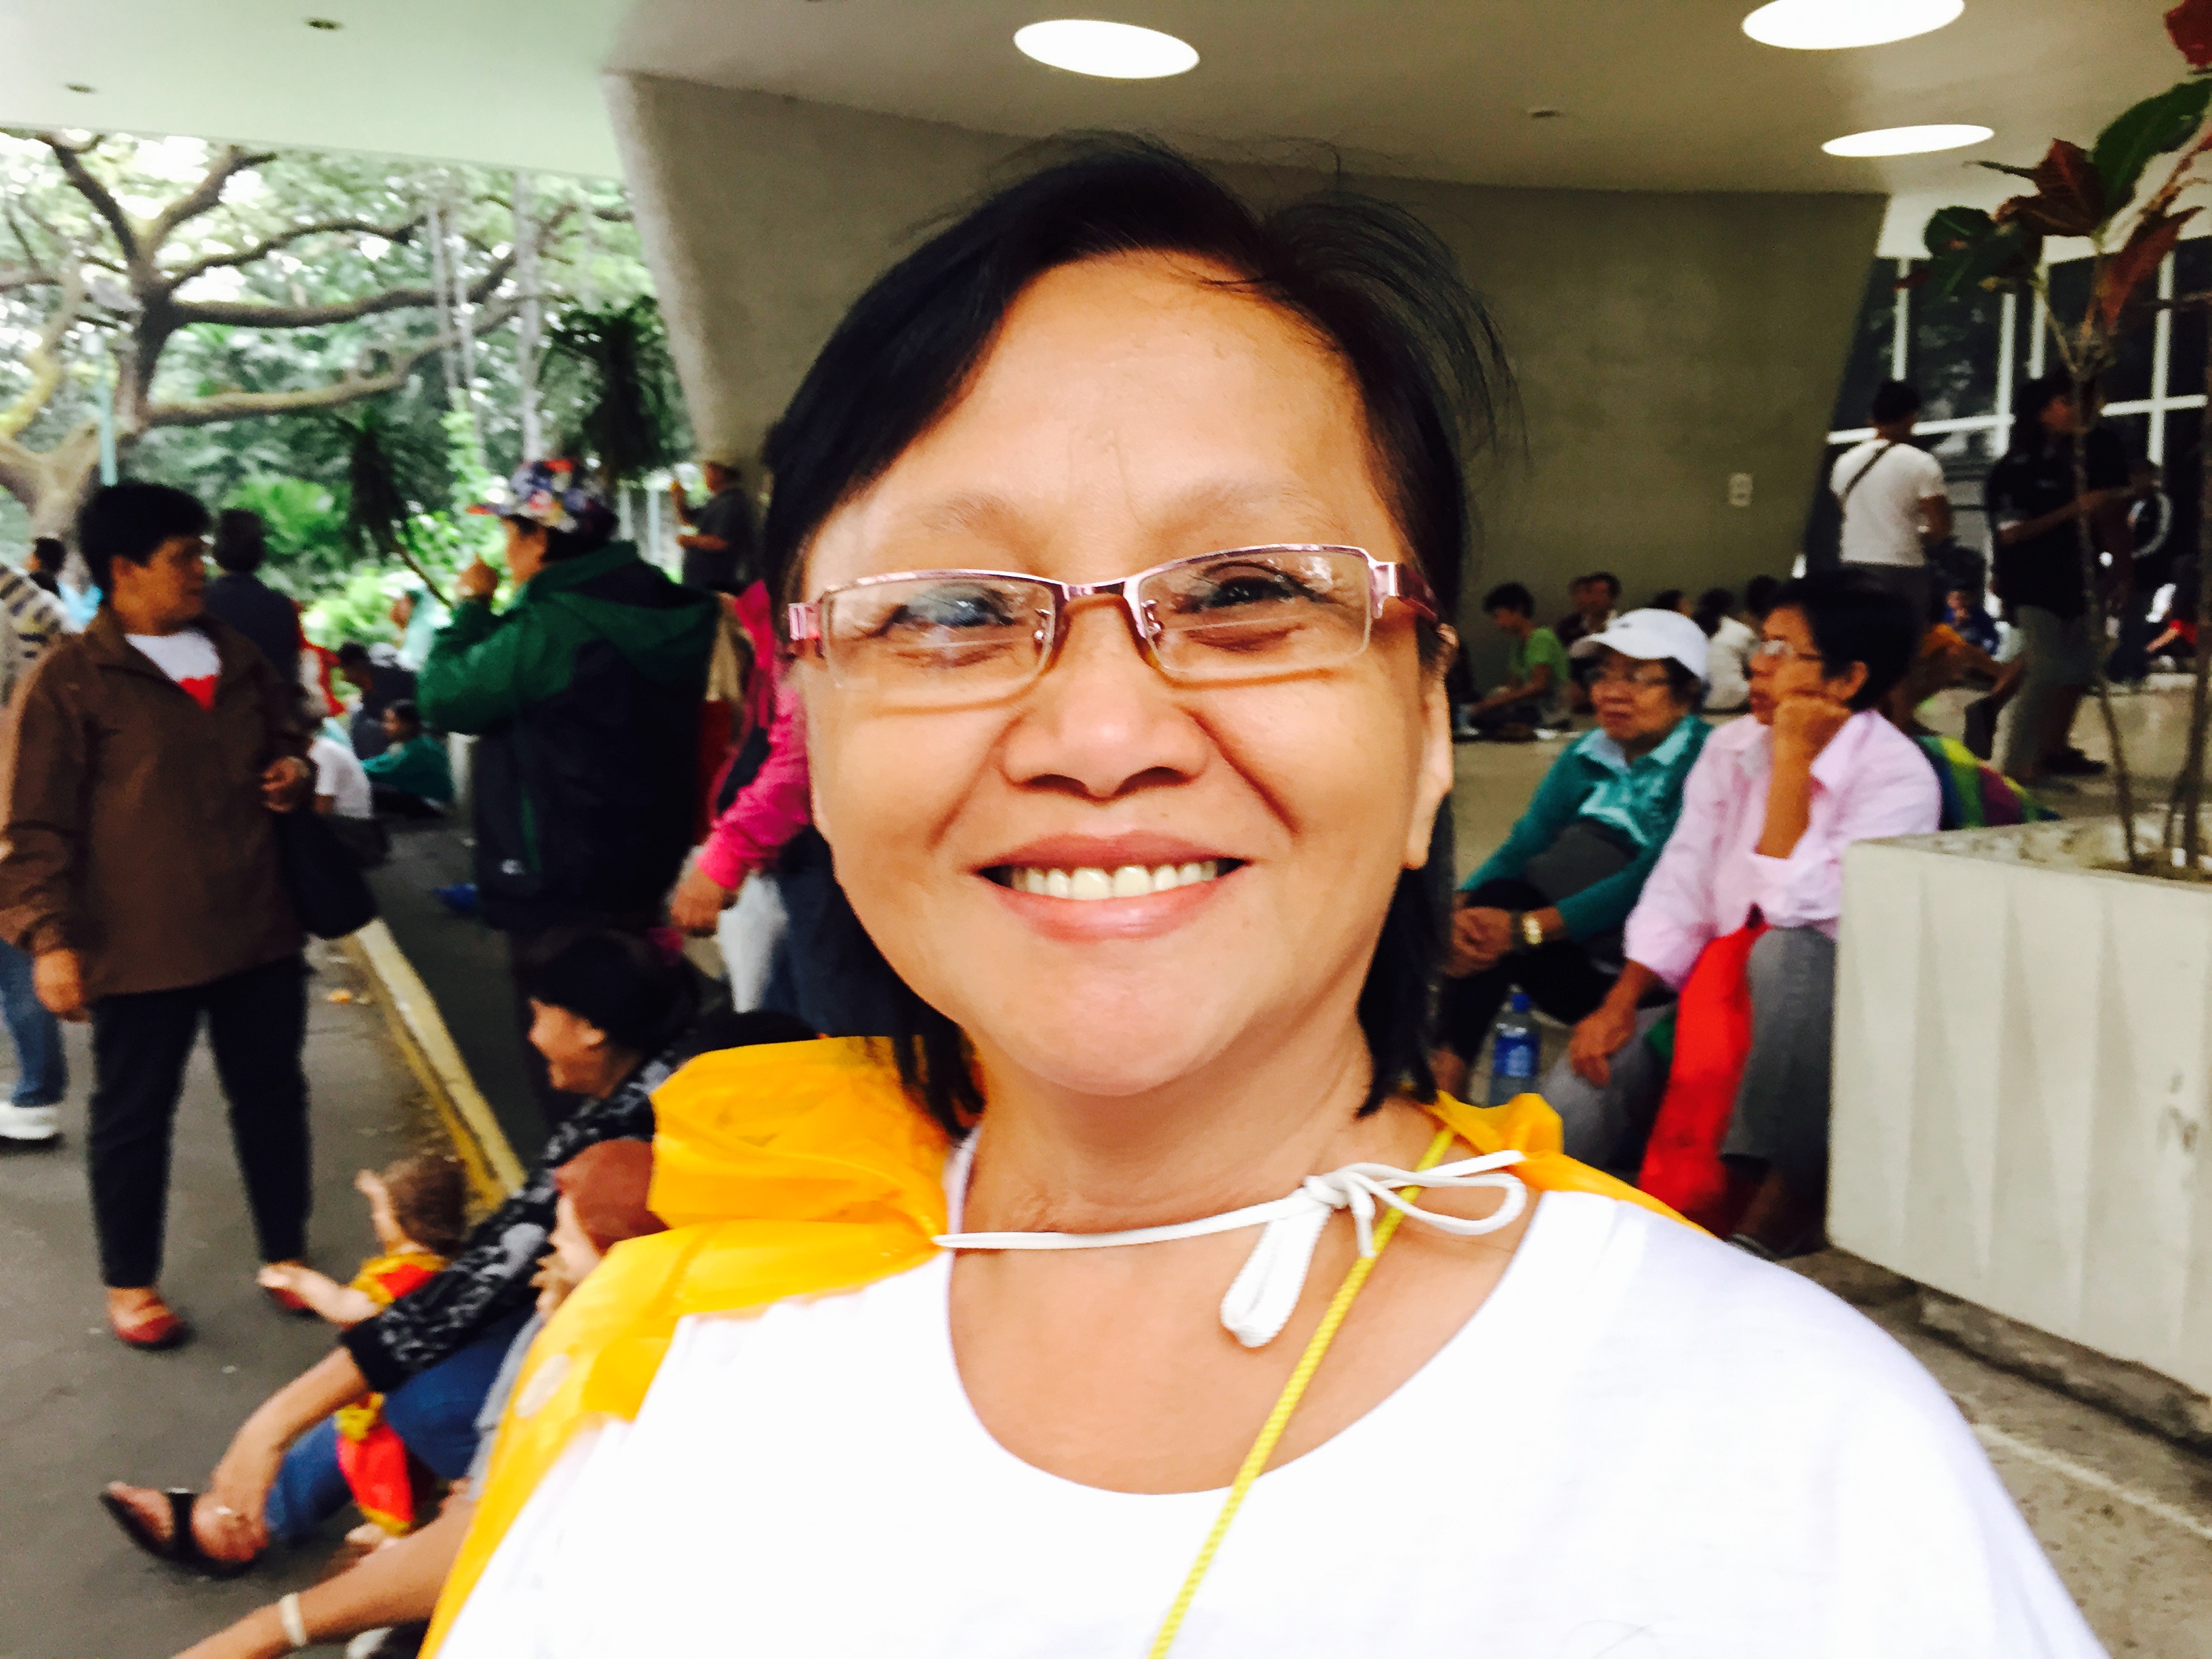 Lucila de Jesus, 60, said St. John Paul II has blessed her. She was one of the thousands who welcomed the then pope during his visit to the Philippines in 1981. NESTOR CORRALES